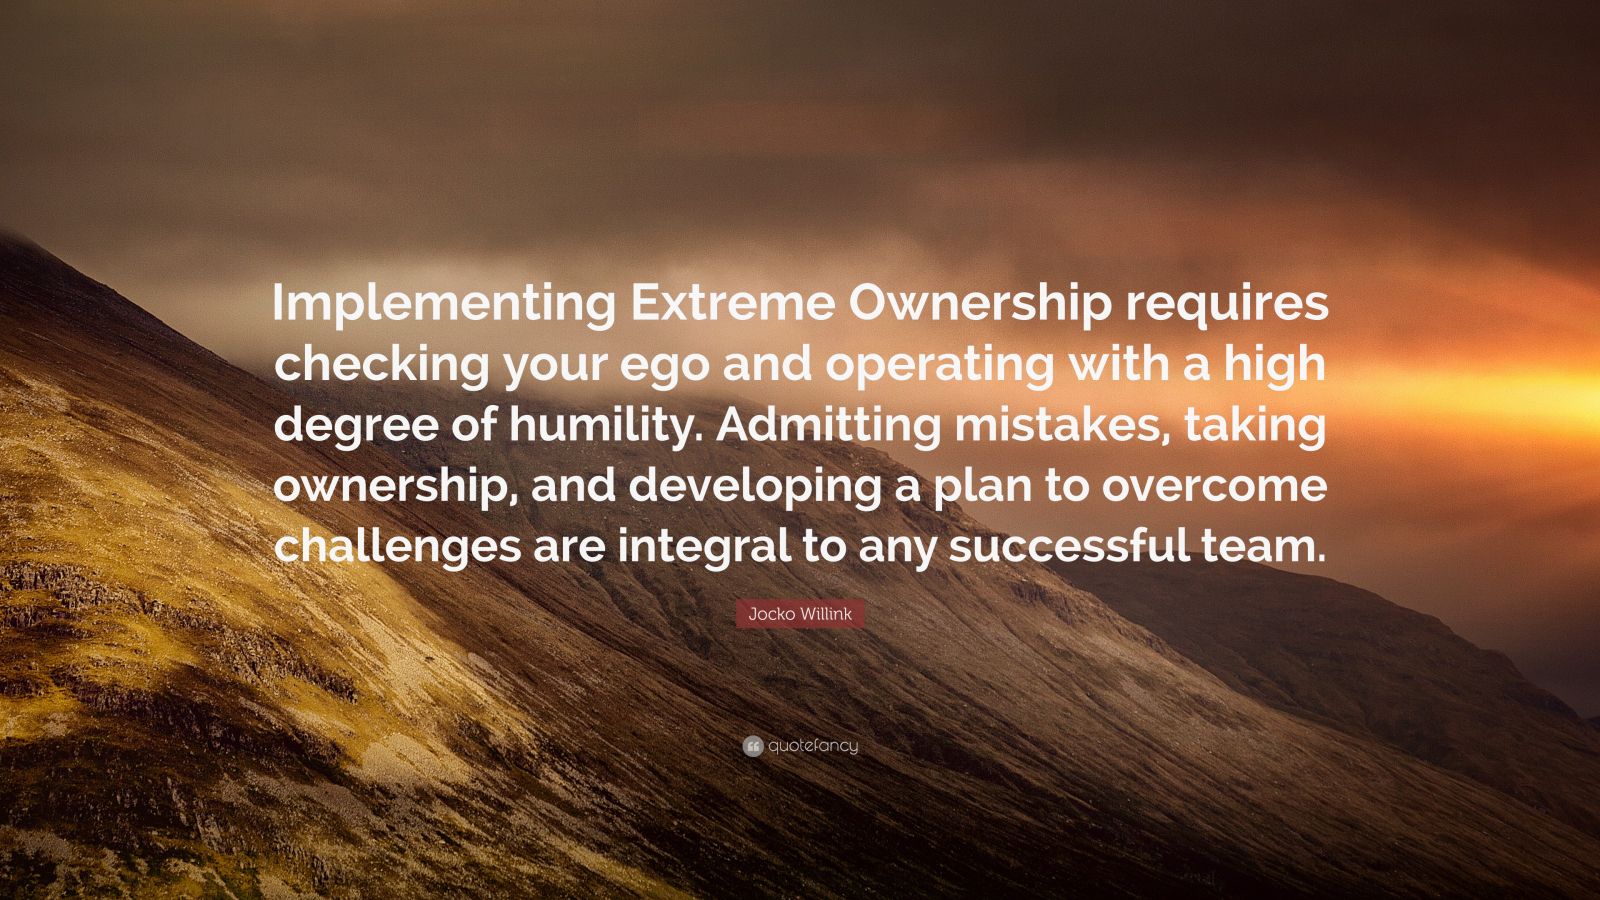 Jocko Willink Quote: “Implementing Extreme Ownership requires